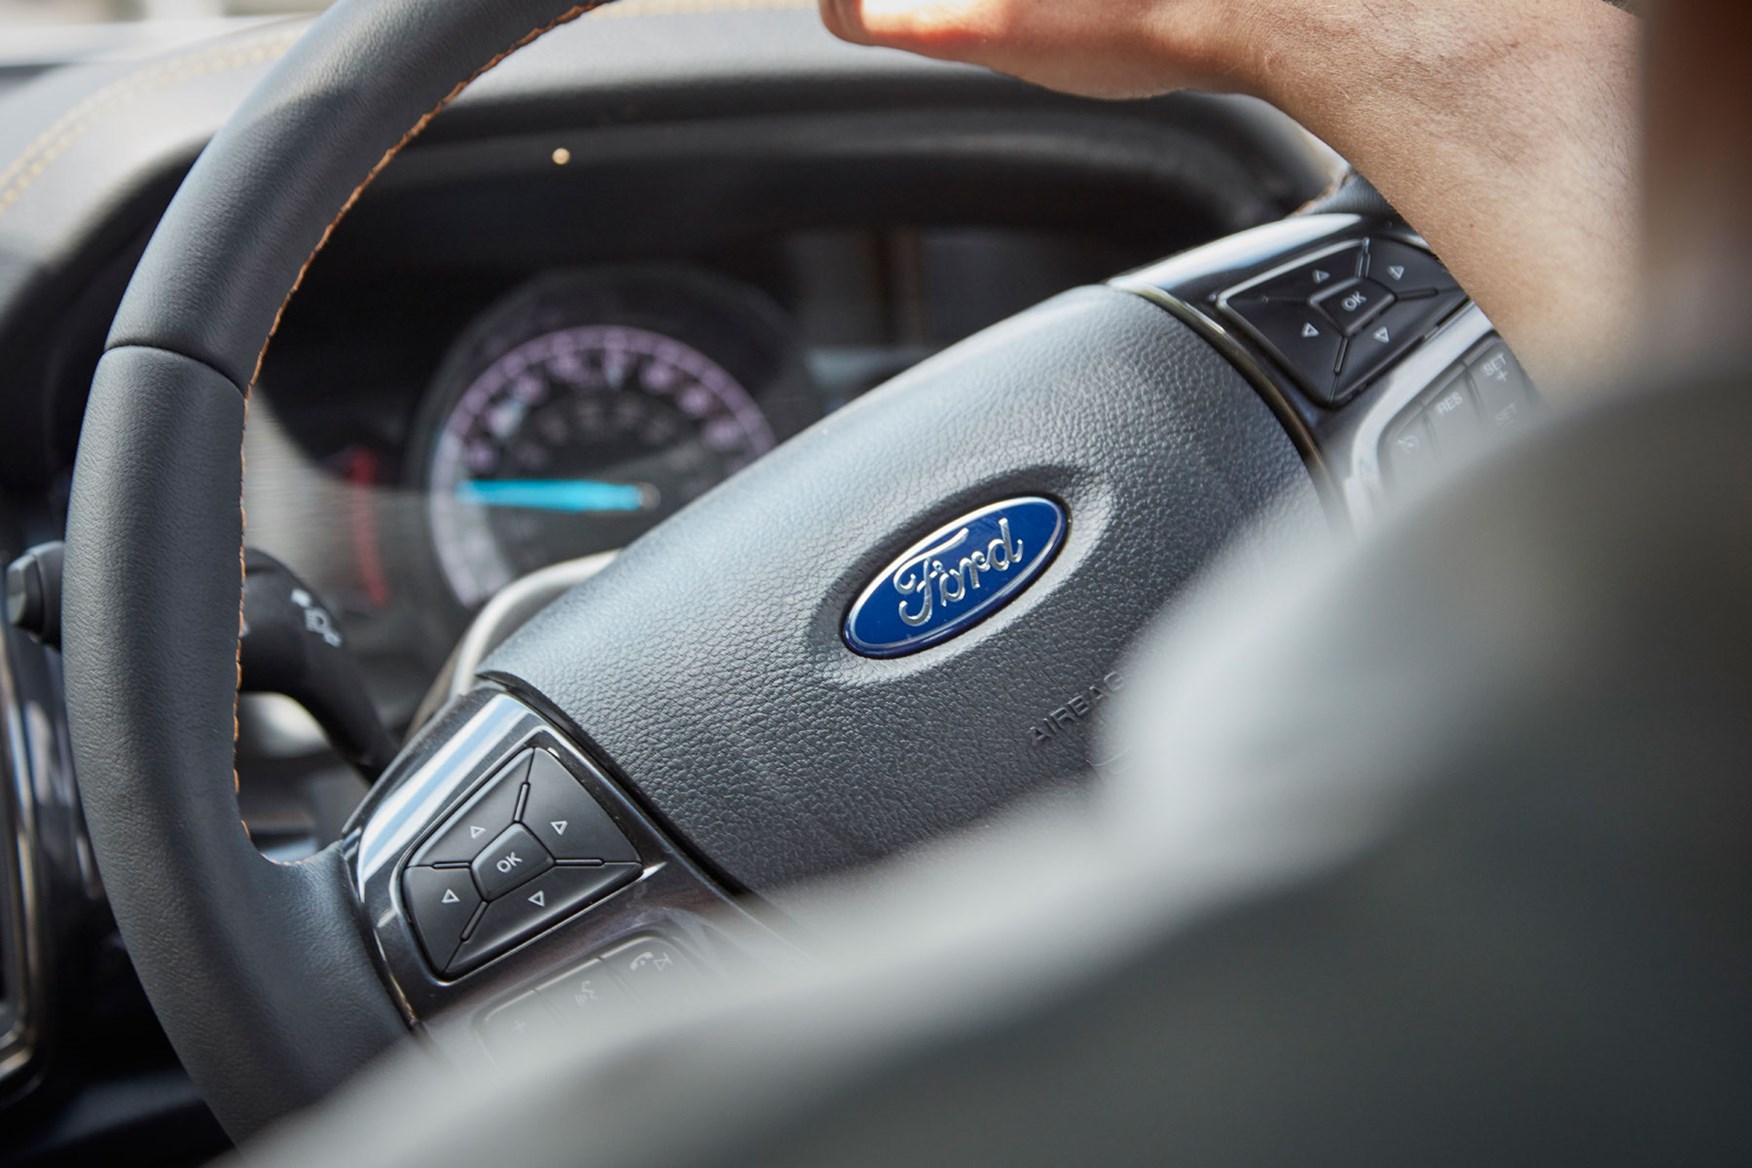 Ford Ranger review - 2019 facelift, view of steering wheel and dials over driver's shoulder